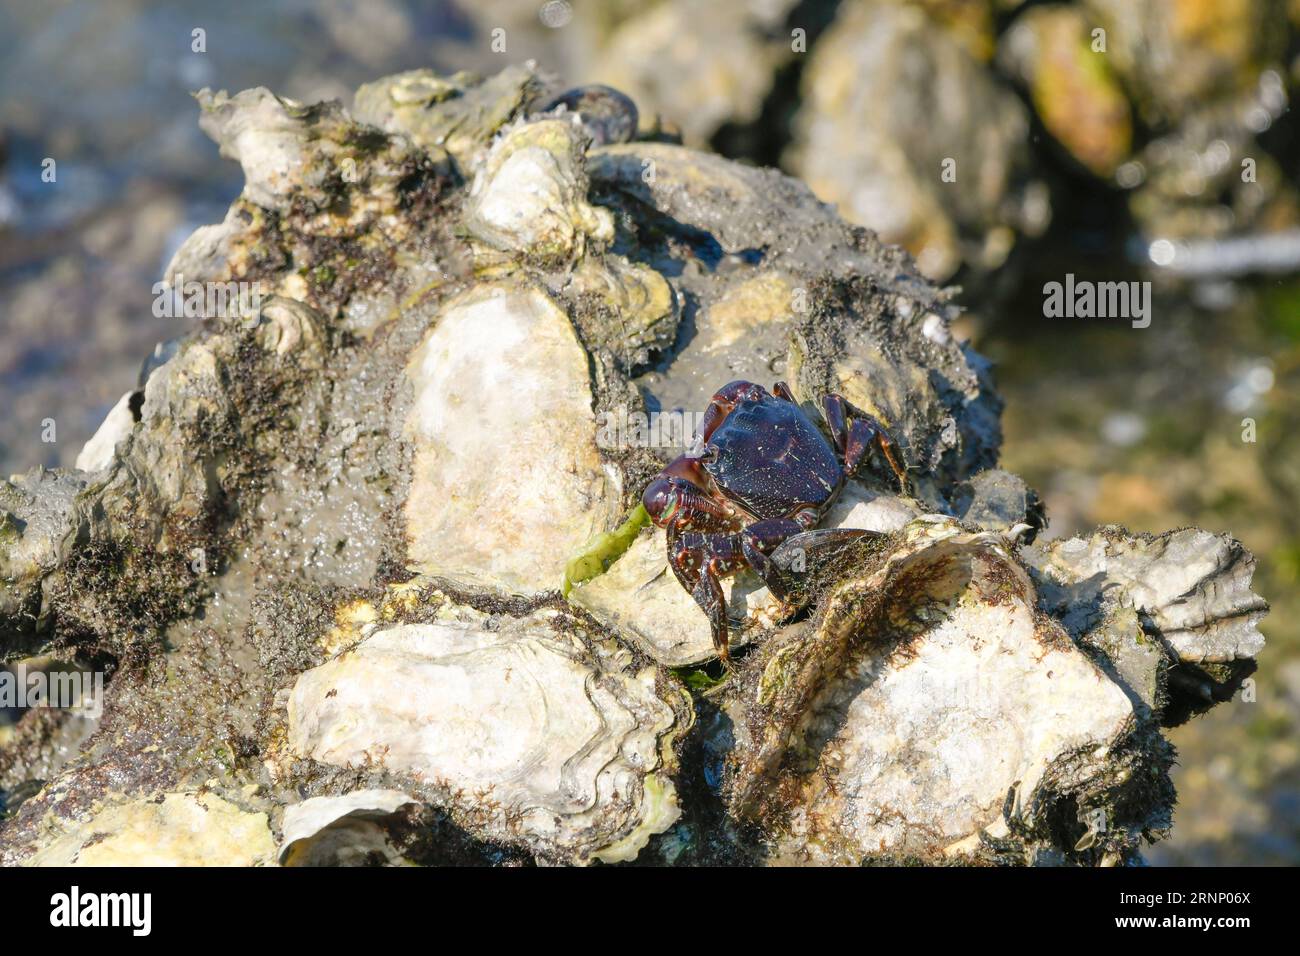 Marbled rock crab standing still on some oysters at low tide Stock Photo